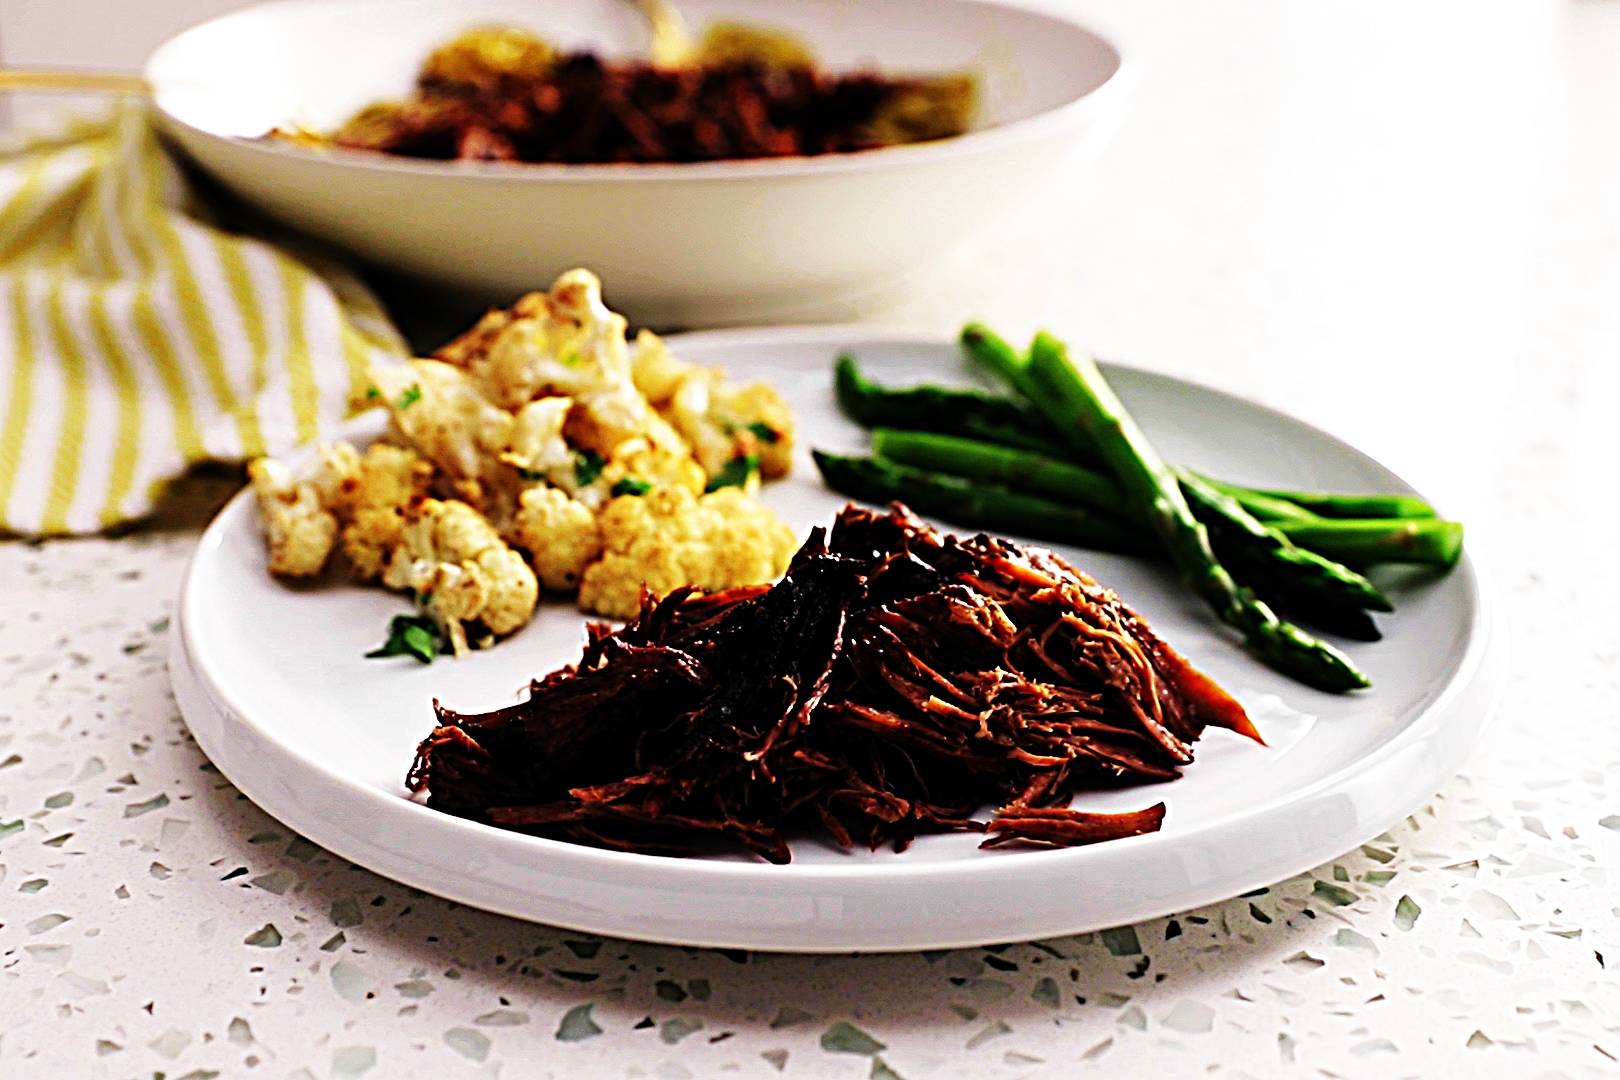 Stupid-Easy Recipe for Oven Mississippi Pot Roast (#1 Top-Rated)